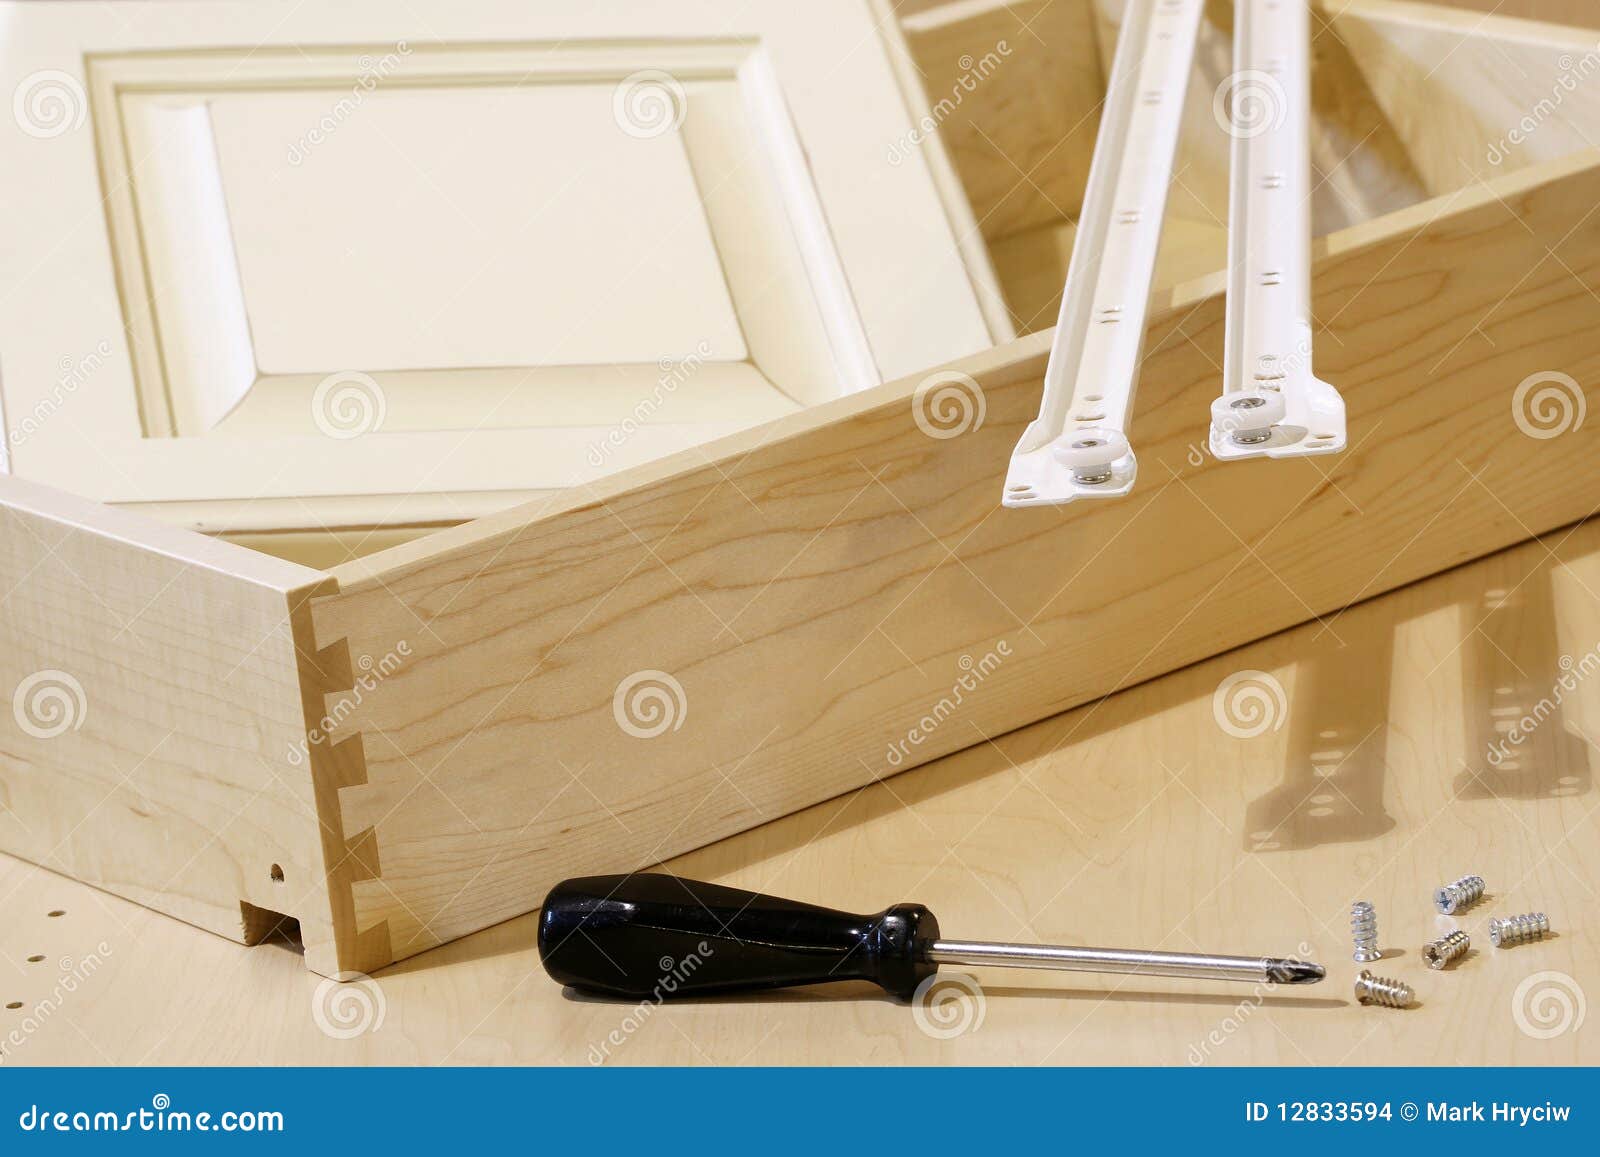 Kitchen Cabinet Building Materials Stock Images - Image 